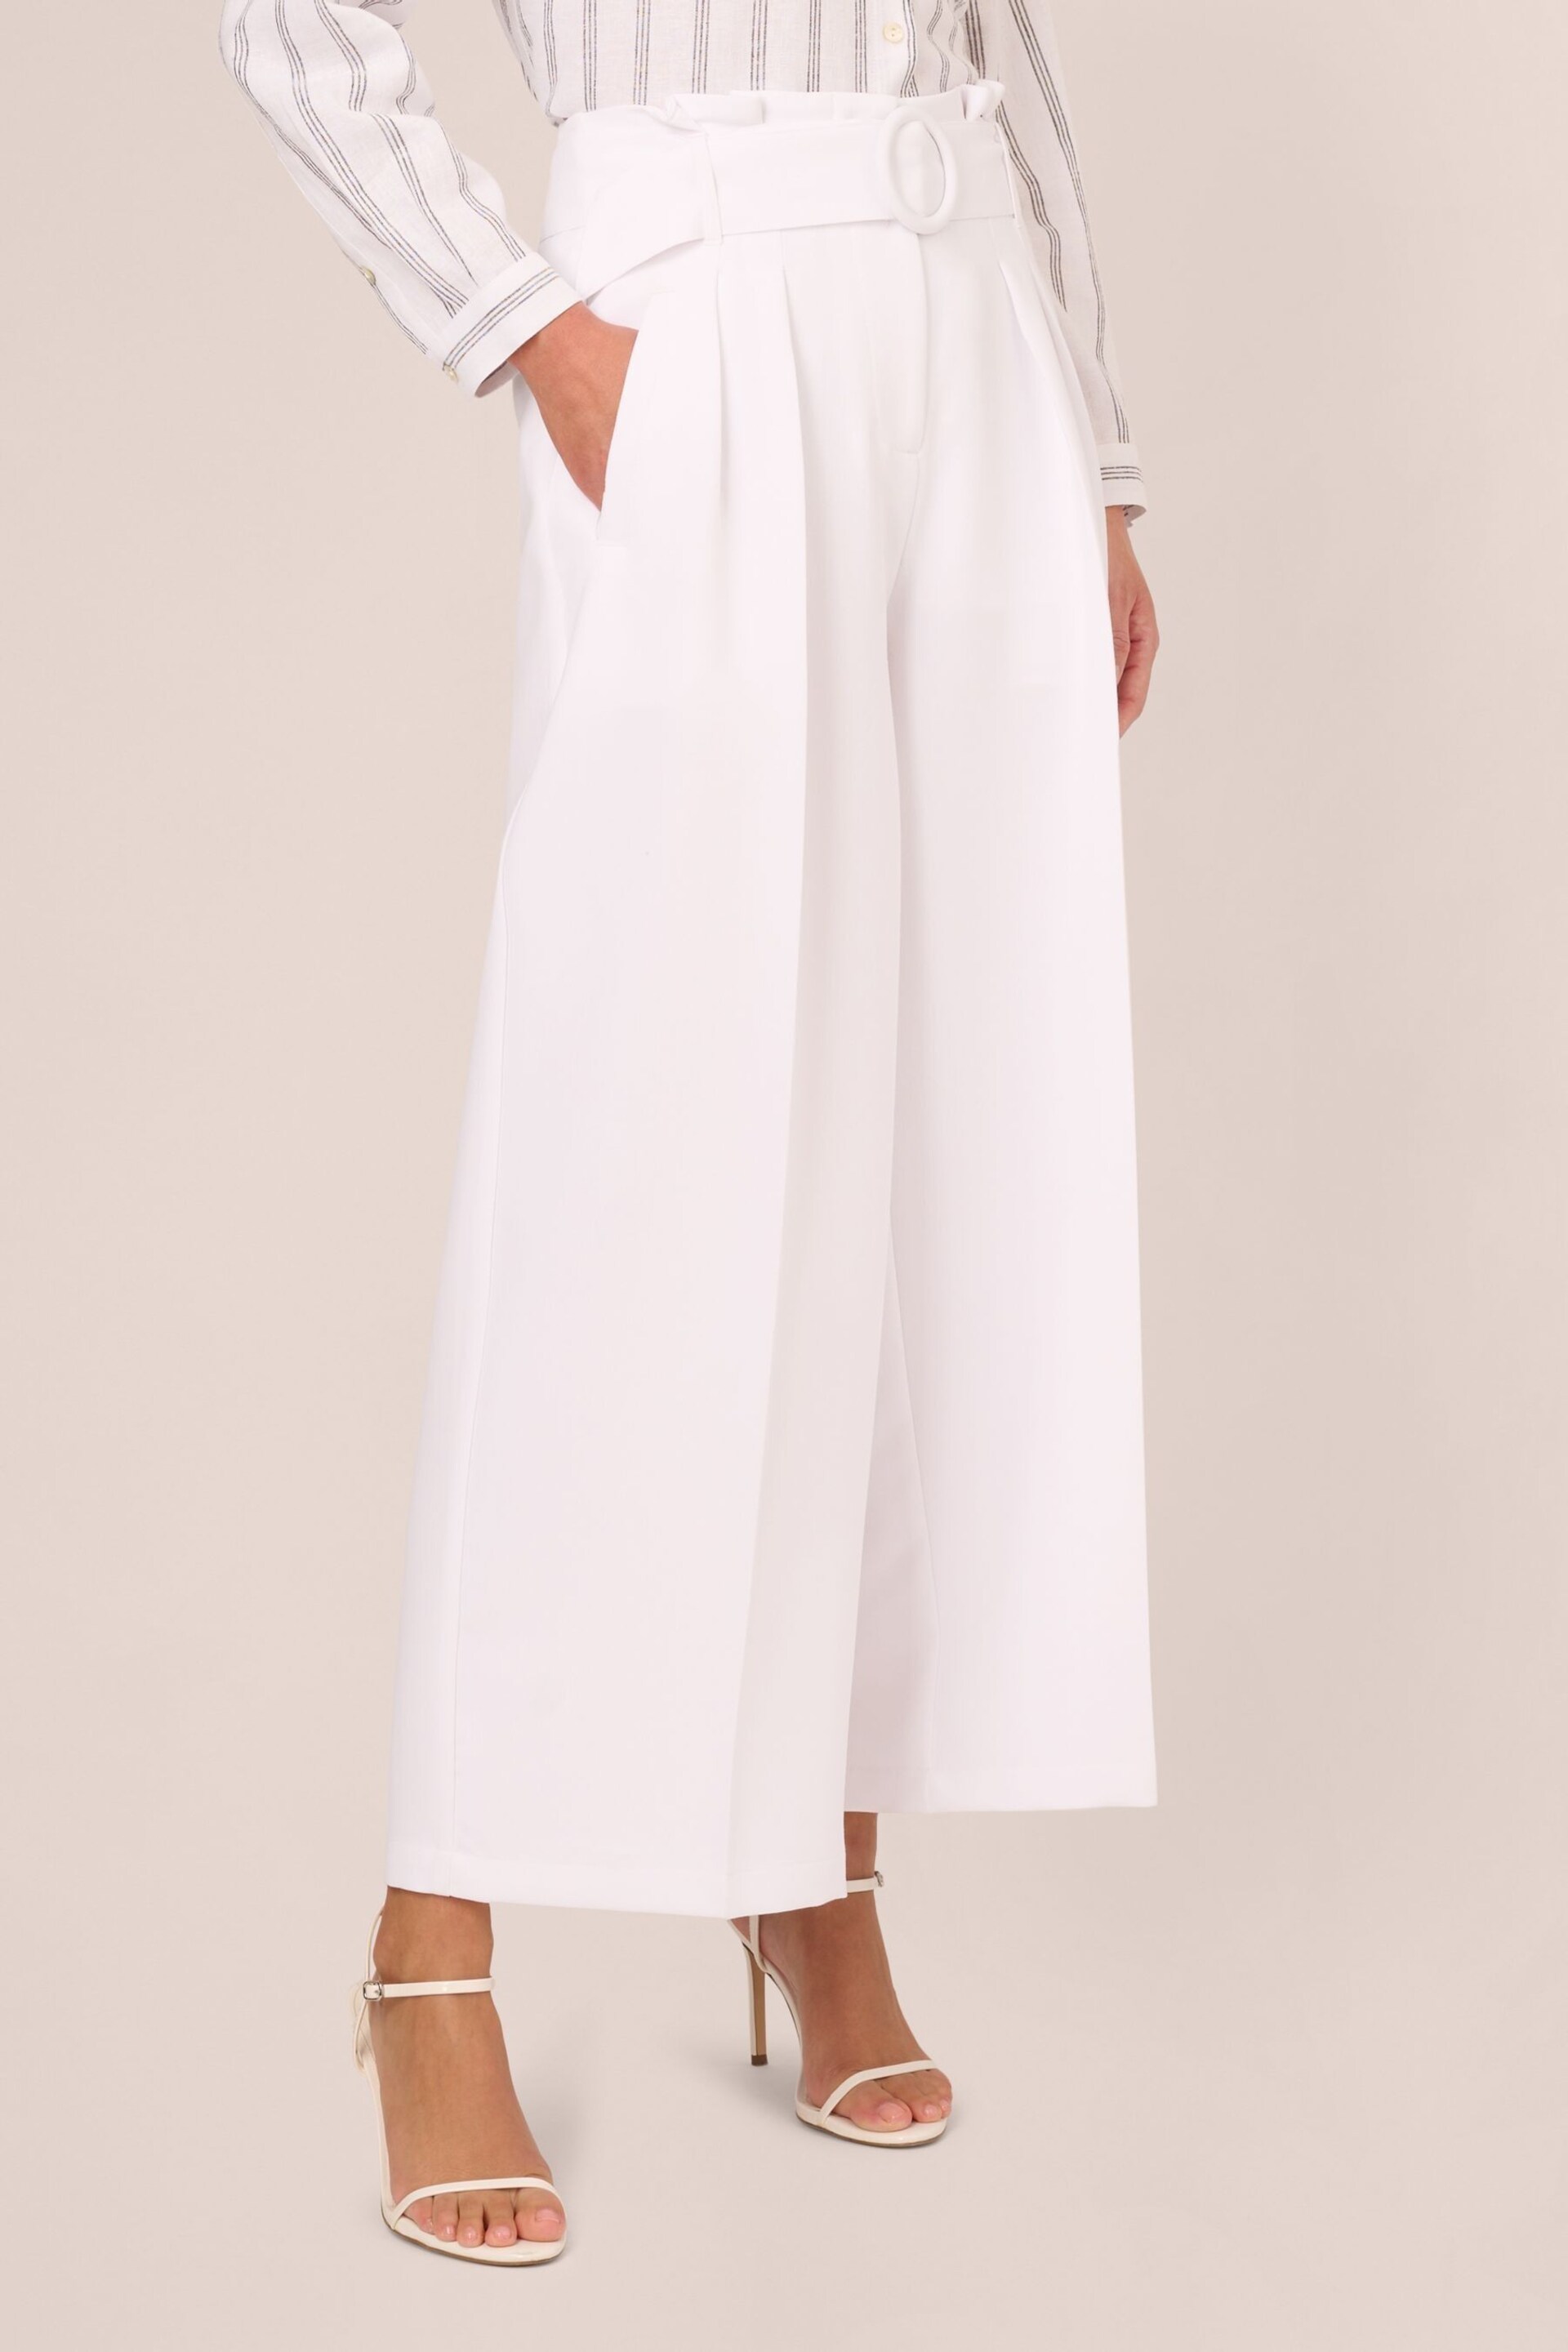 Adrianna Papell Solid Woven White Trousers With Belt - Image 1 of 7